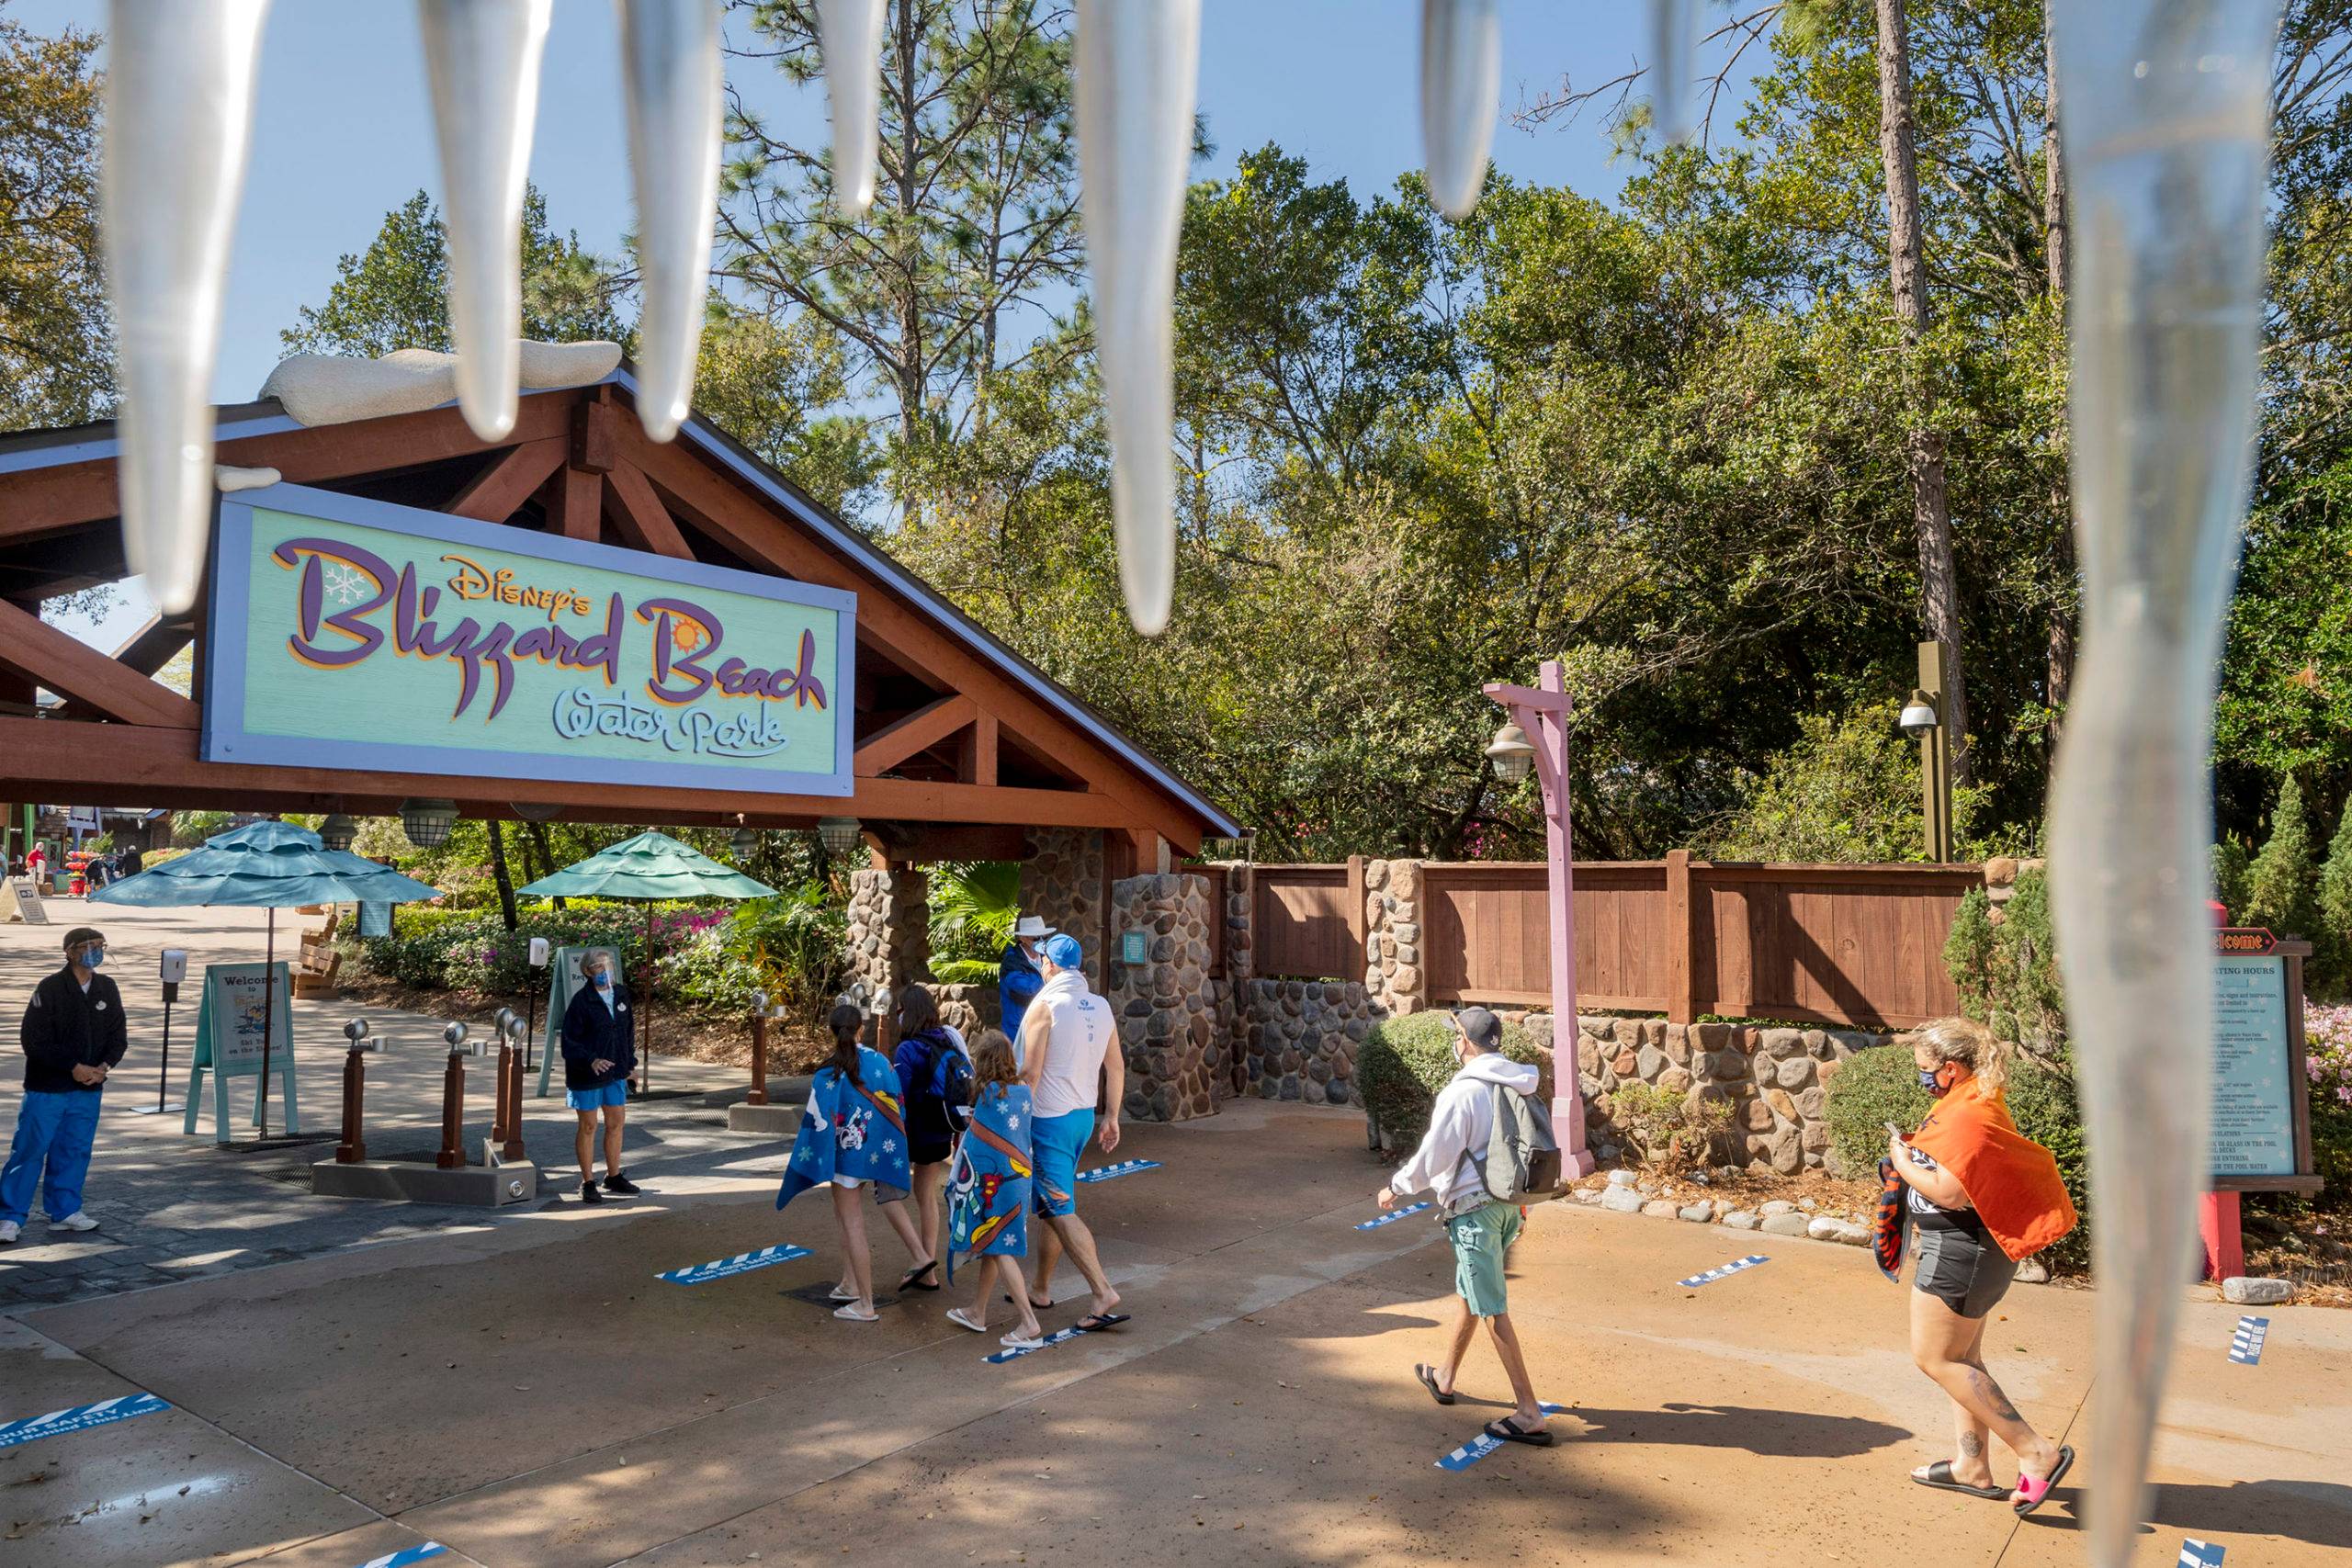 Disney's Blizzard Beach reopens after almost year long closure due to pandemic